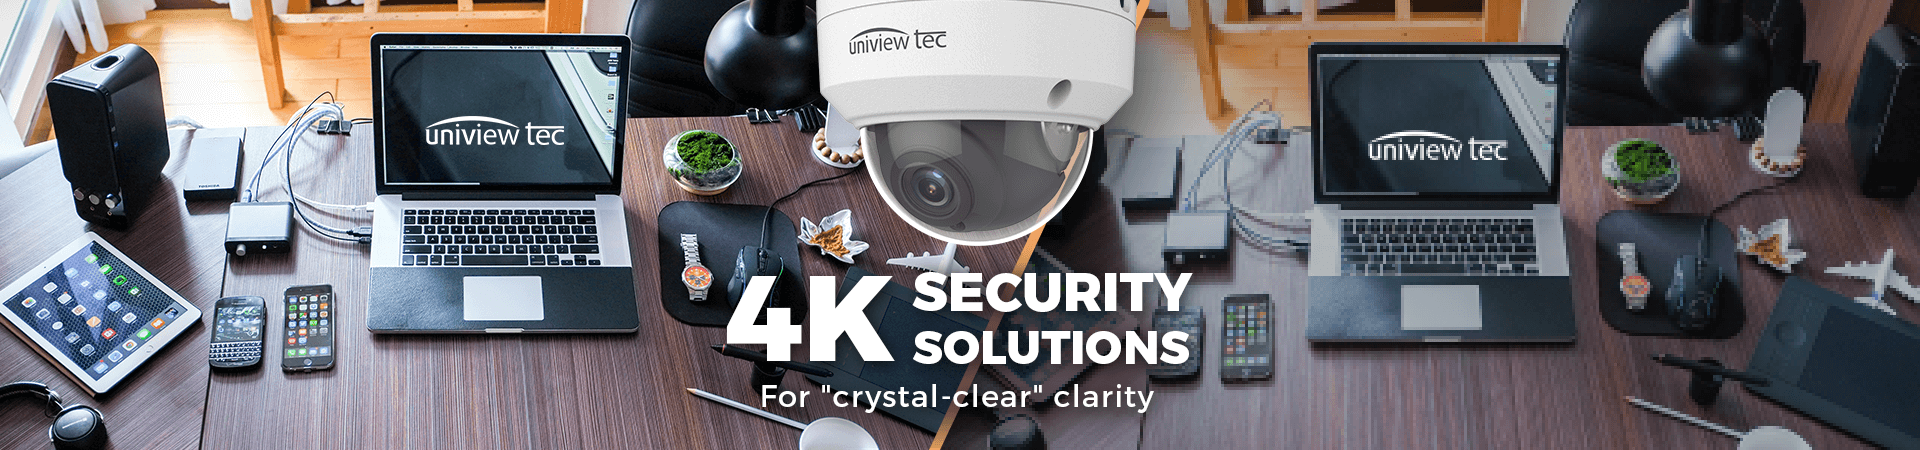 4k Security Solutions